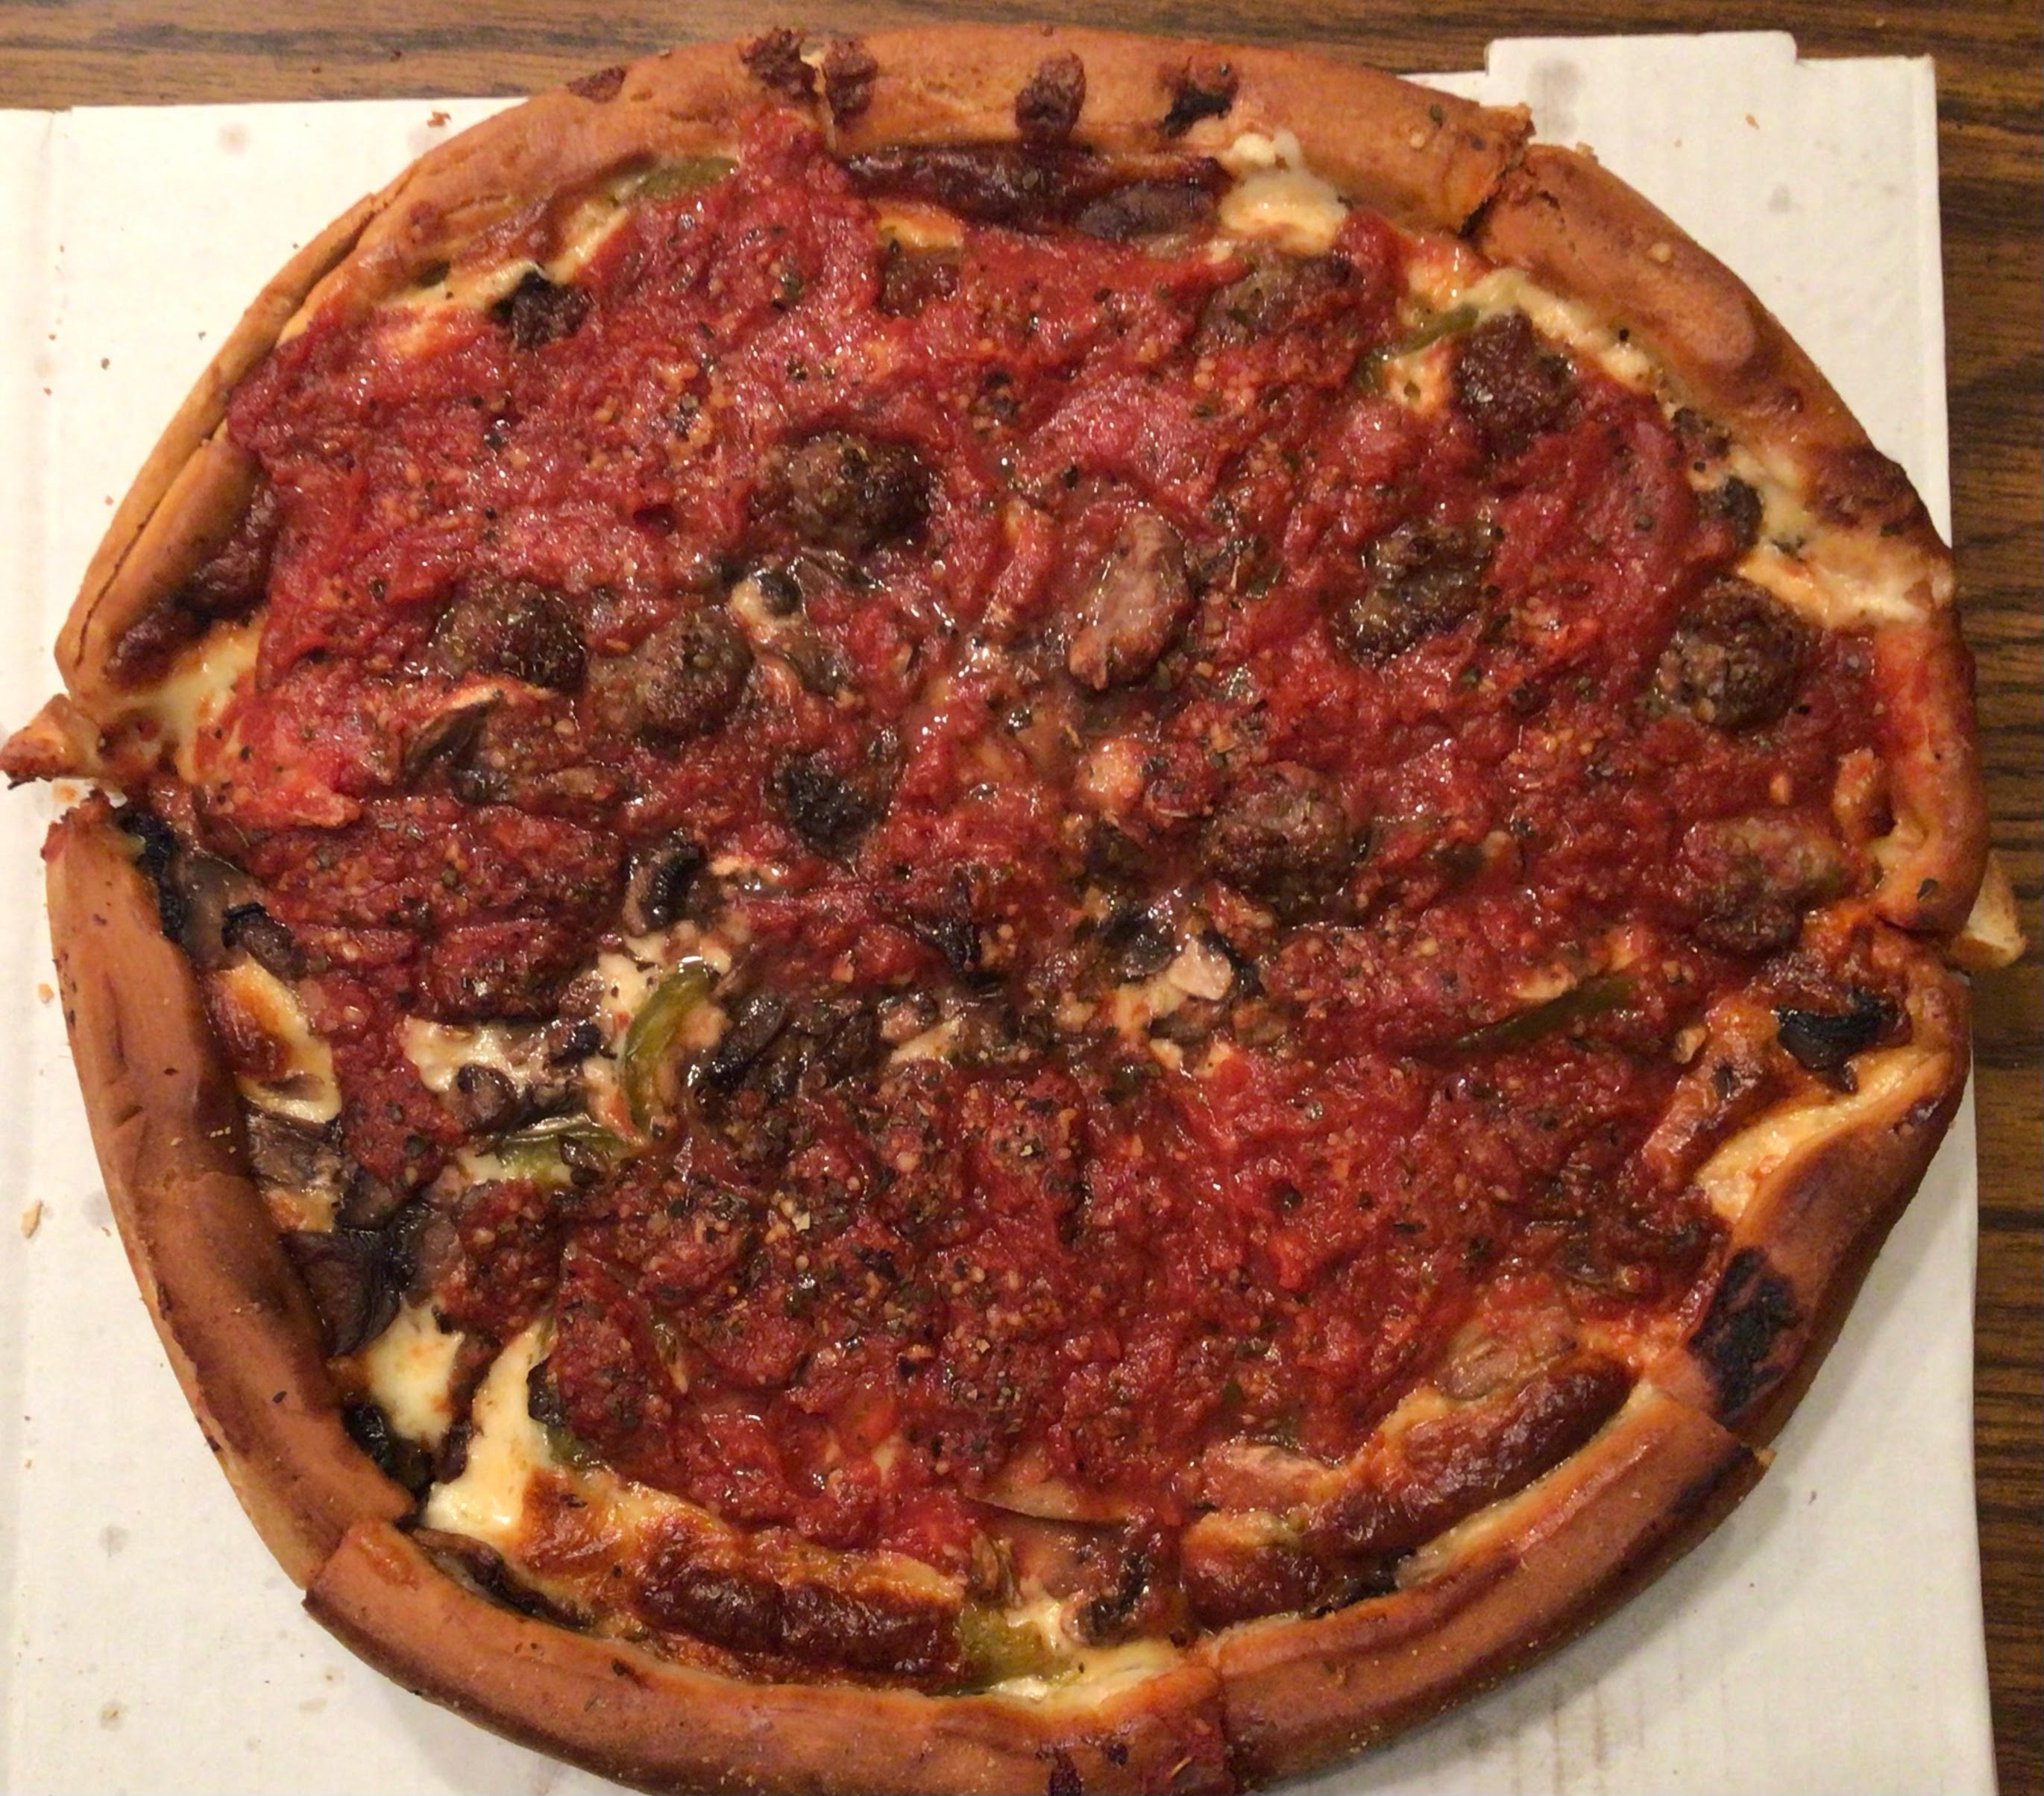 Papa Delâ€™s Sicilian Pan Pizza is shown whole, photographed from above: an approximately two-inch deep crust (darkened slightly at the edges) holds some visible toppings, such as sausage and green pepper. The rich, red pizza sauce covers the top completely. Photo by Rachael McMillan.